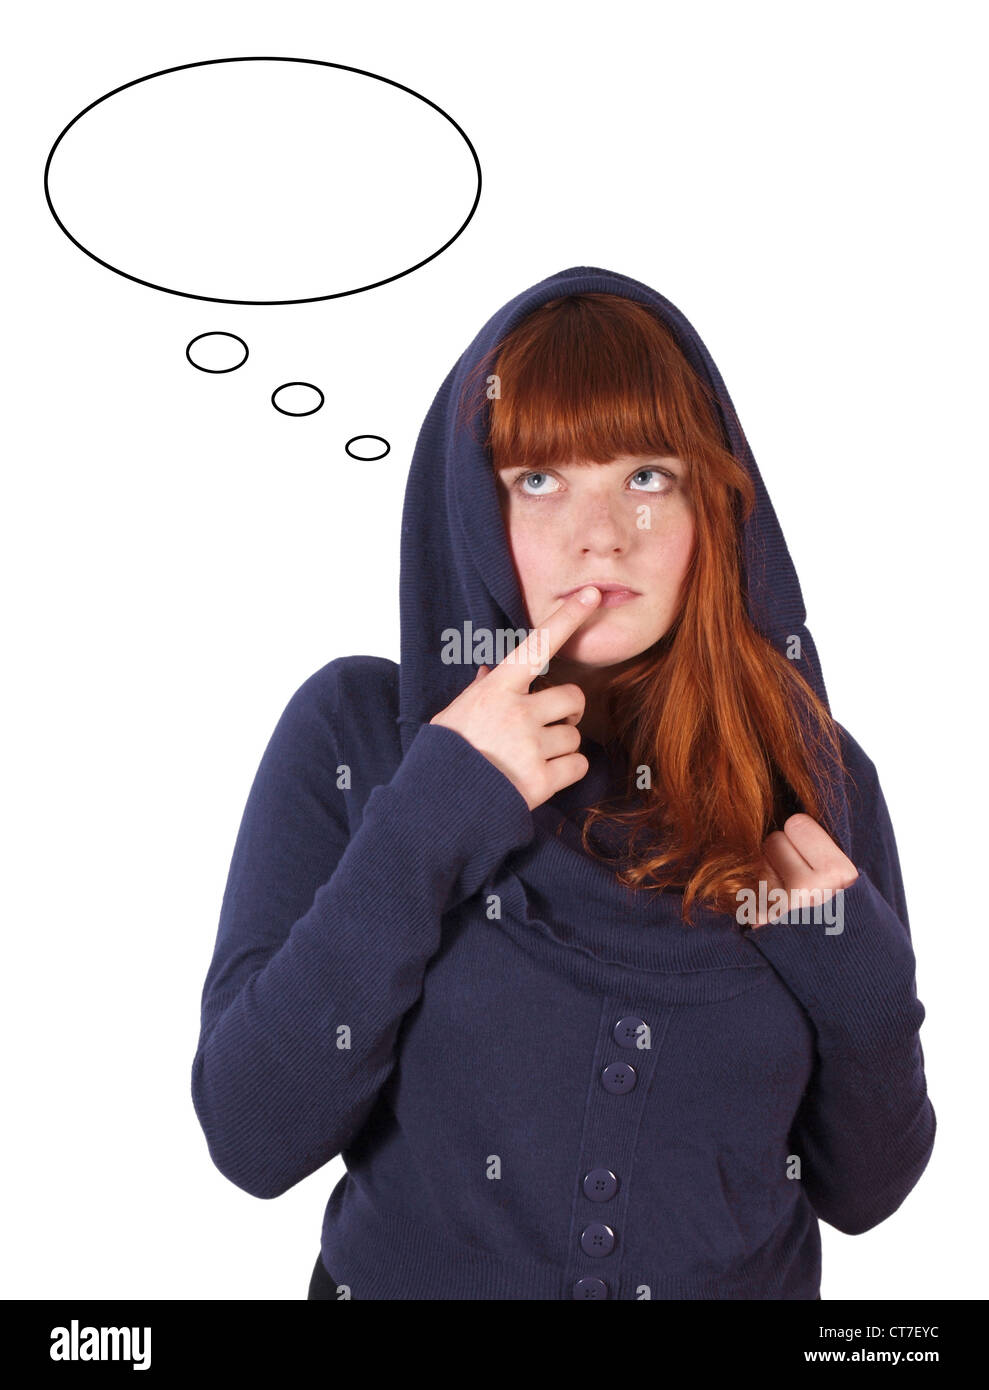 young woman with thought bubble Stock Photo